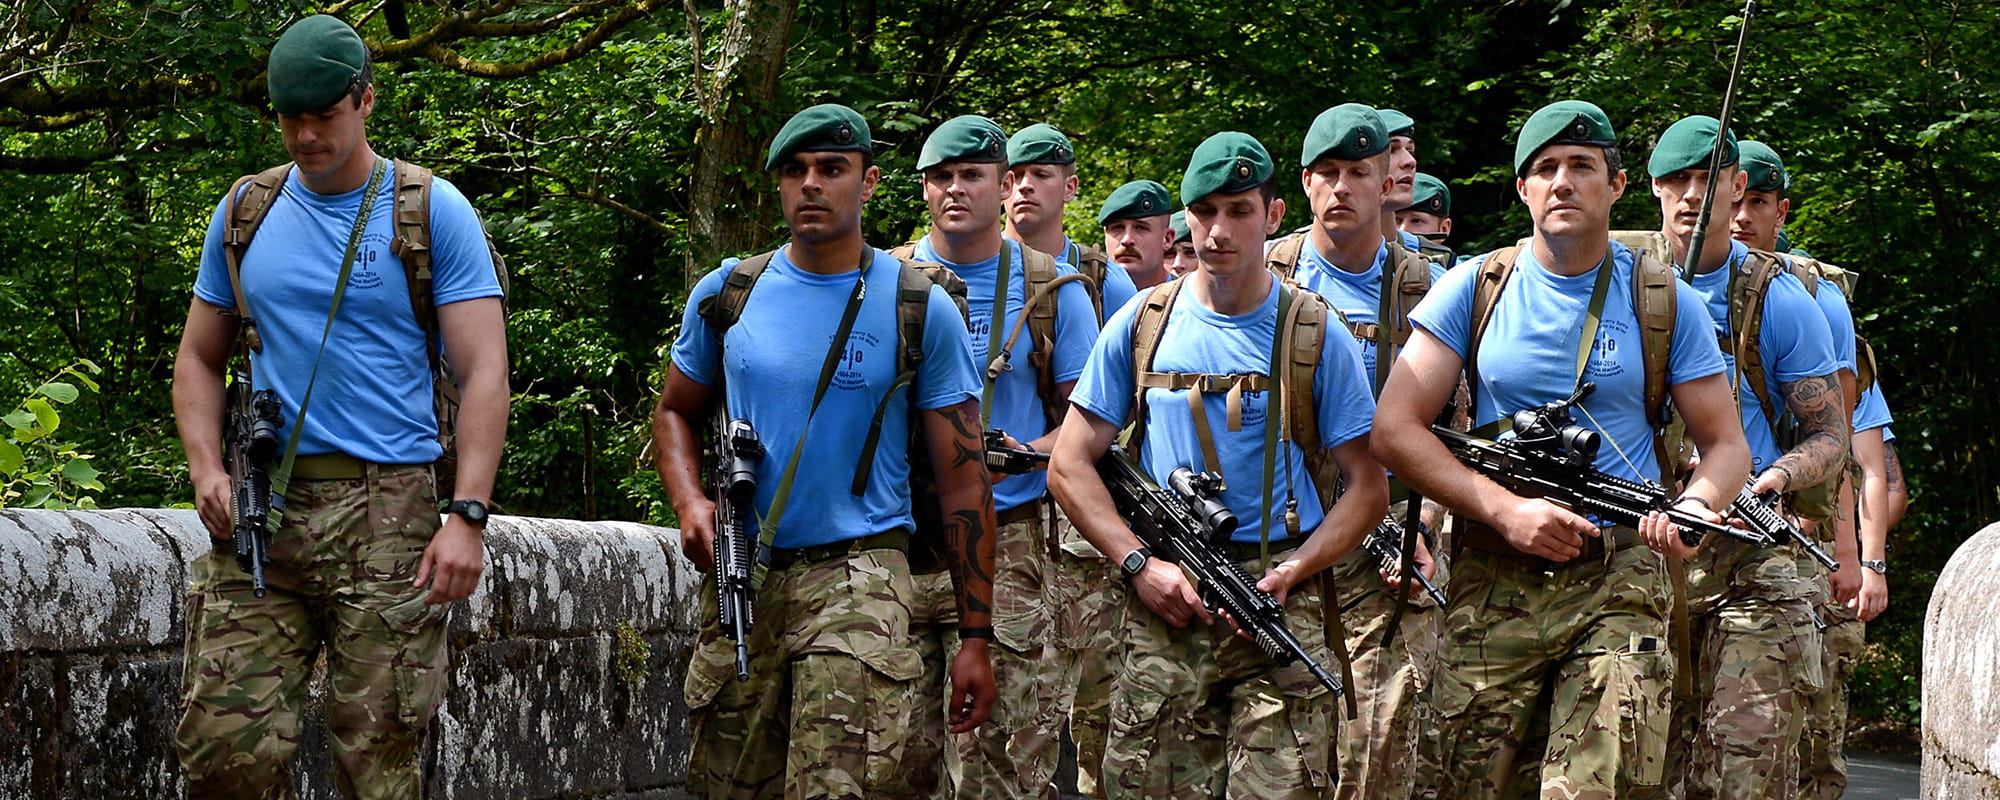 40 Commando Royal Marines compete iconic 30 miler. Hundreds of Royal Marines, and attached ranks, from 40 Commando Royal Marines, in Taunton, descended onto Dartmoor to complete the iconic “30 Miler” Commando test.